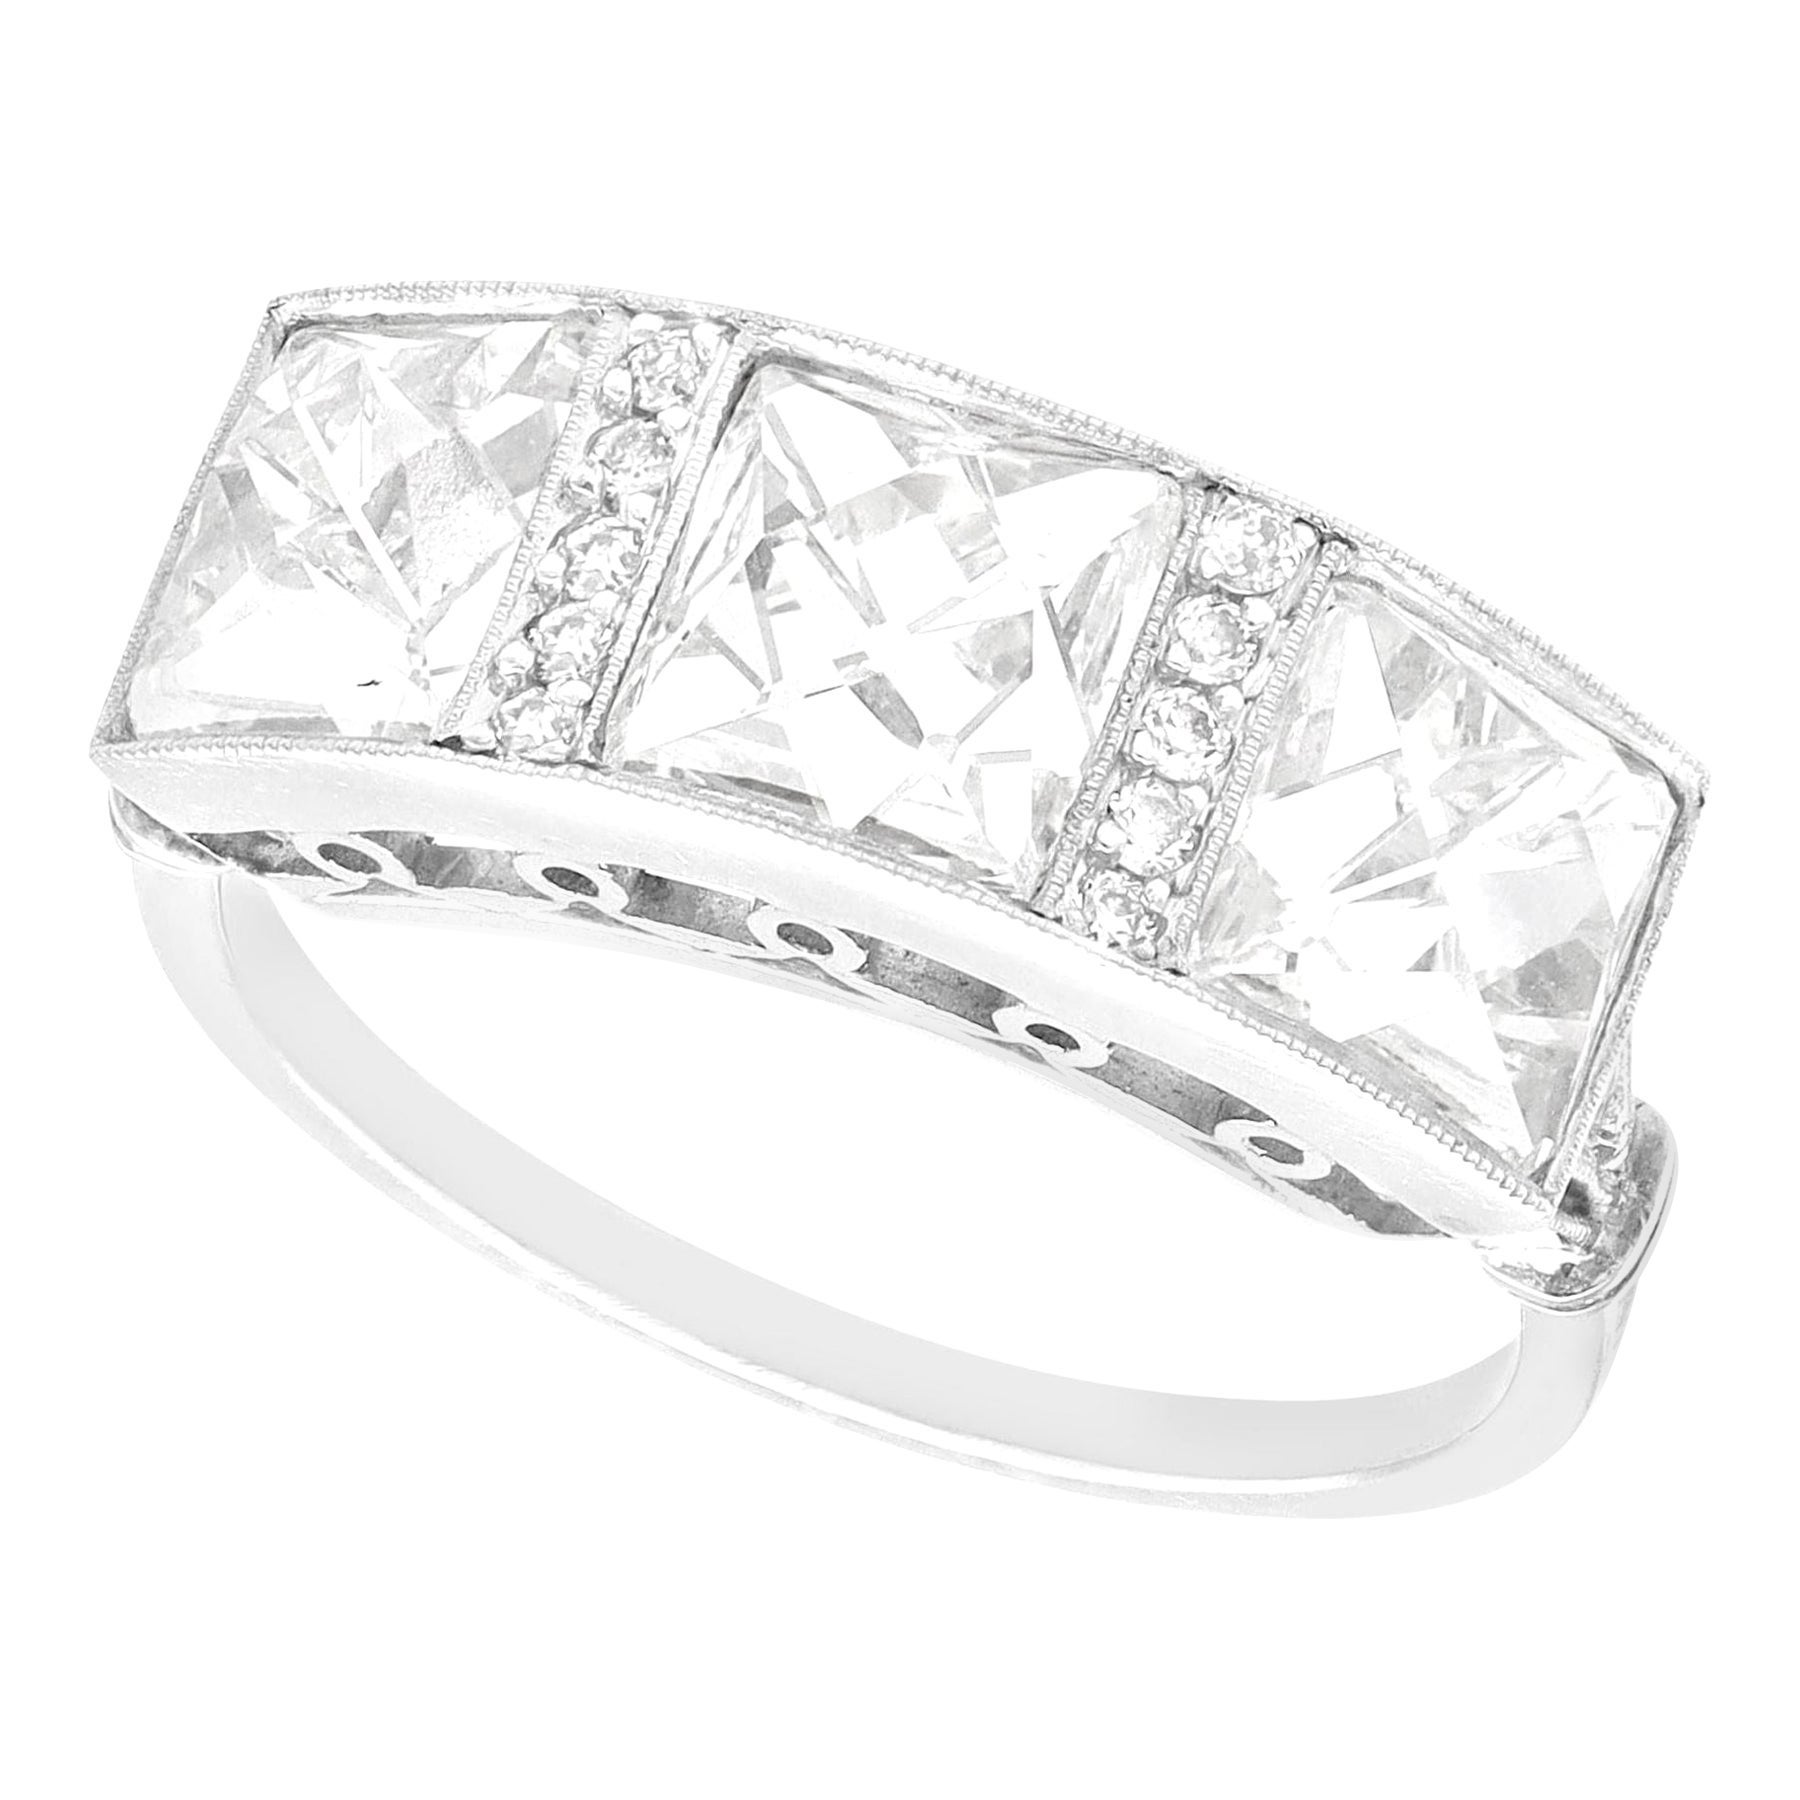 3.84 Carat Diamond and Platinum Trilogy Engagement Ring For Sale